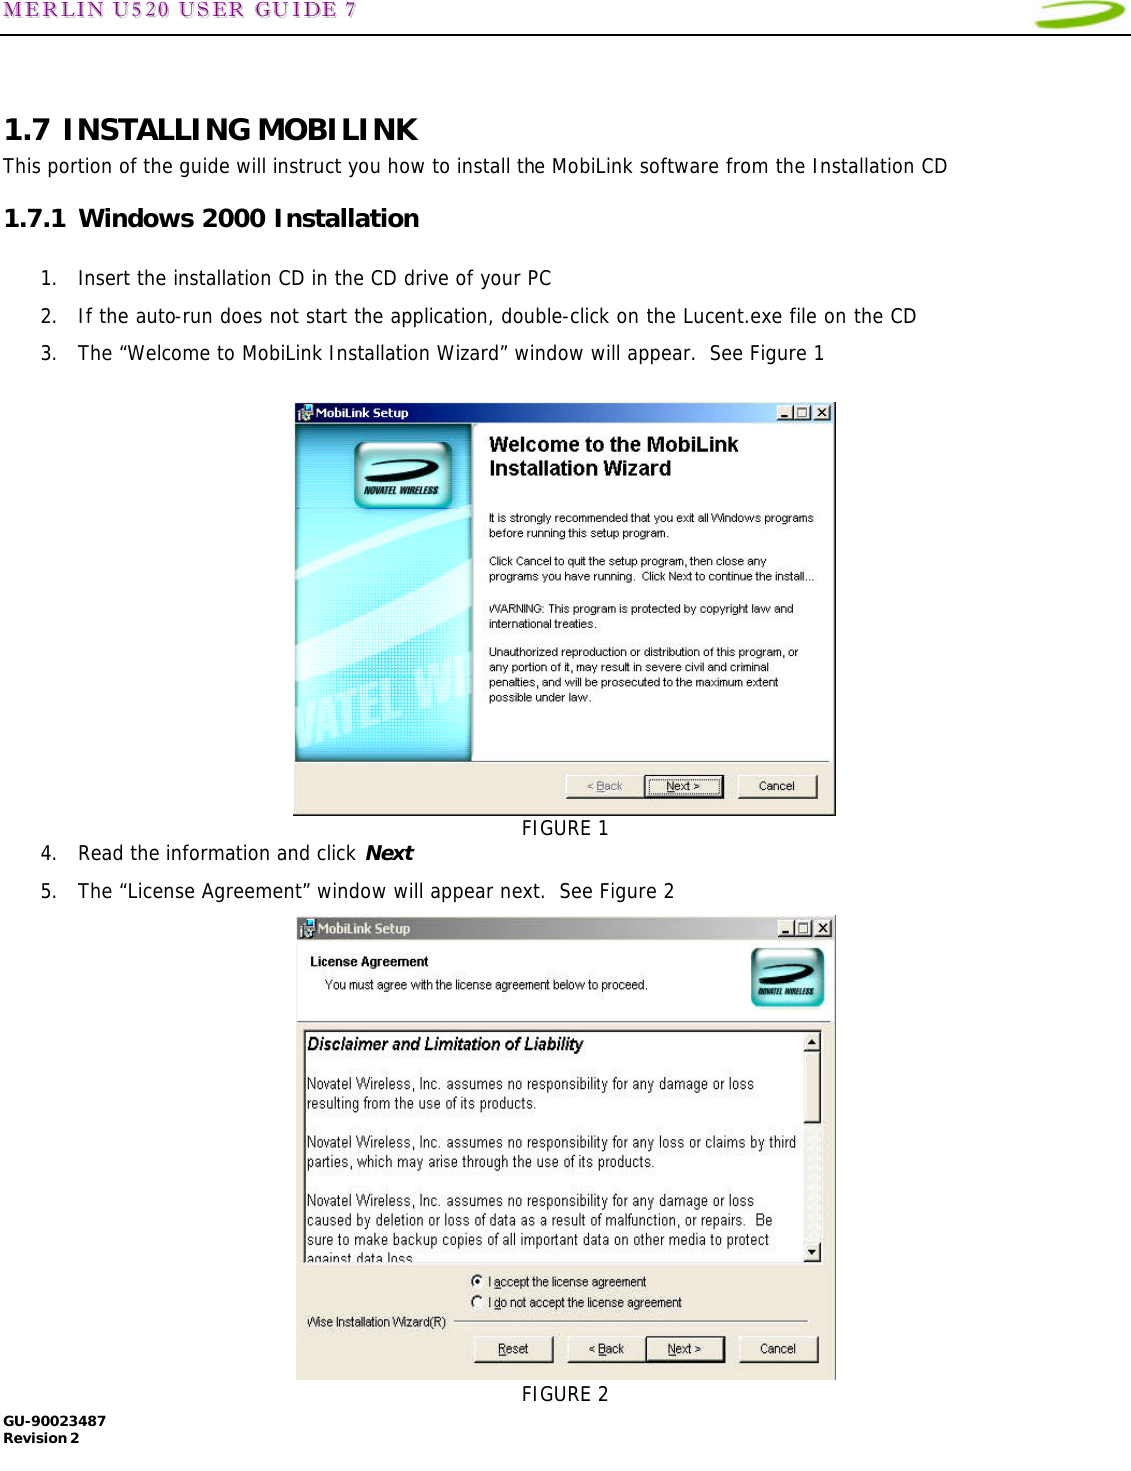 MMEERRLLIINN  UU552200  UUSSEERR  GGUUIIDDEE  77   GU-90023487 Revision 2    1.7 INSTALLING MOBILINK This portion of the guide will instruct you how to install the MobiLink software from the Installation CD 1.7.1 Windows 2000 Installation  1. Insert the installation CD in the CD drive of your PC 2. If the auto-run does not start the application, double-click on the Lucent.exe file on the CD 3. The “Welcome to MobiLink Installation Wizard” window will appear.  See Figure 1   FIGURE 1 4. Read the information and click Next 5. The “License Agreement” window will appear next.  See Figure 2  FIGURE 2 